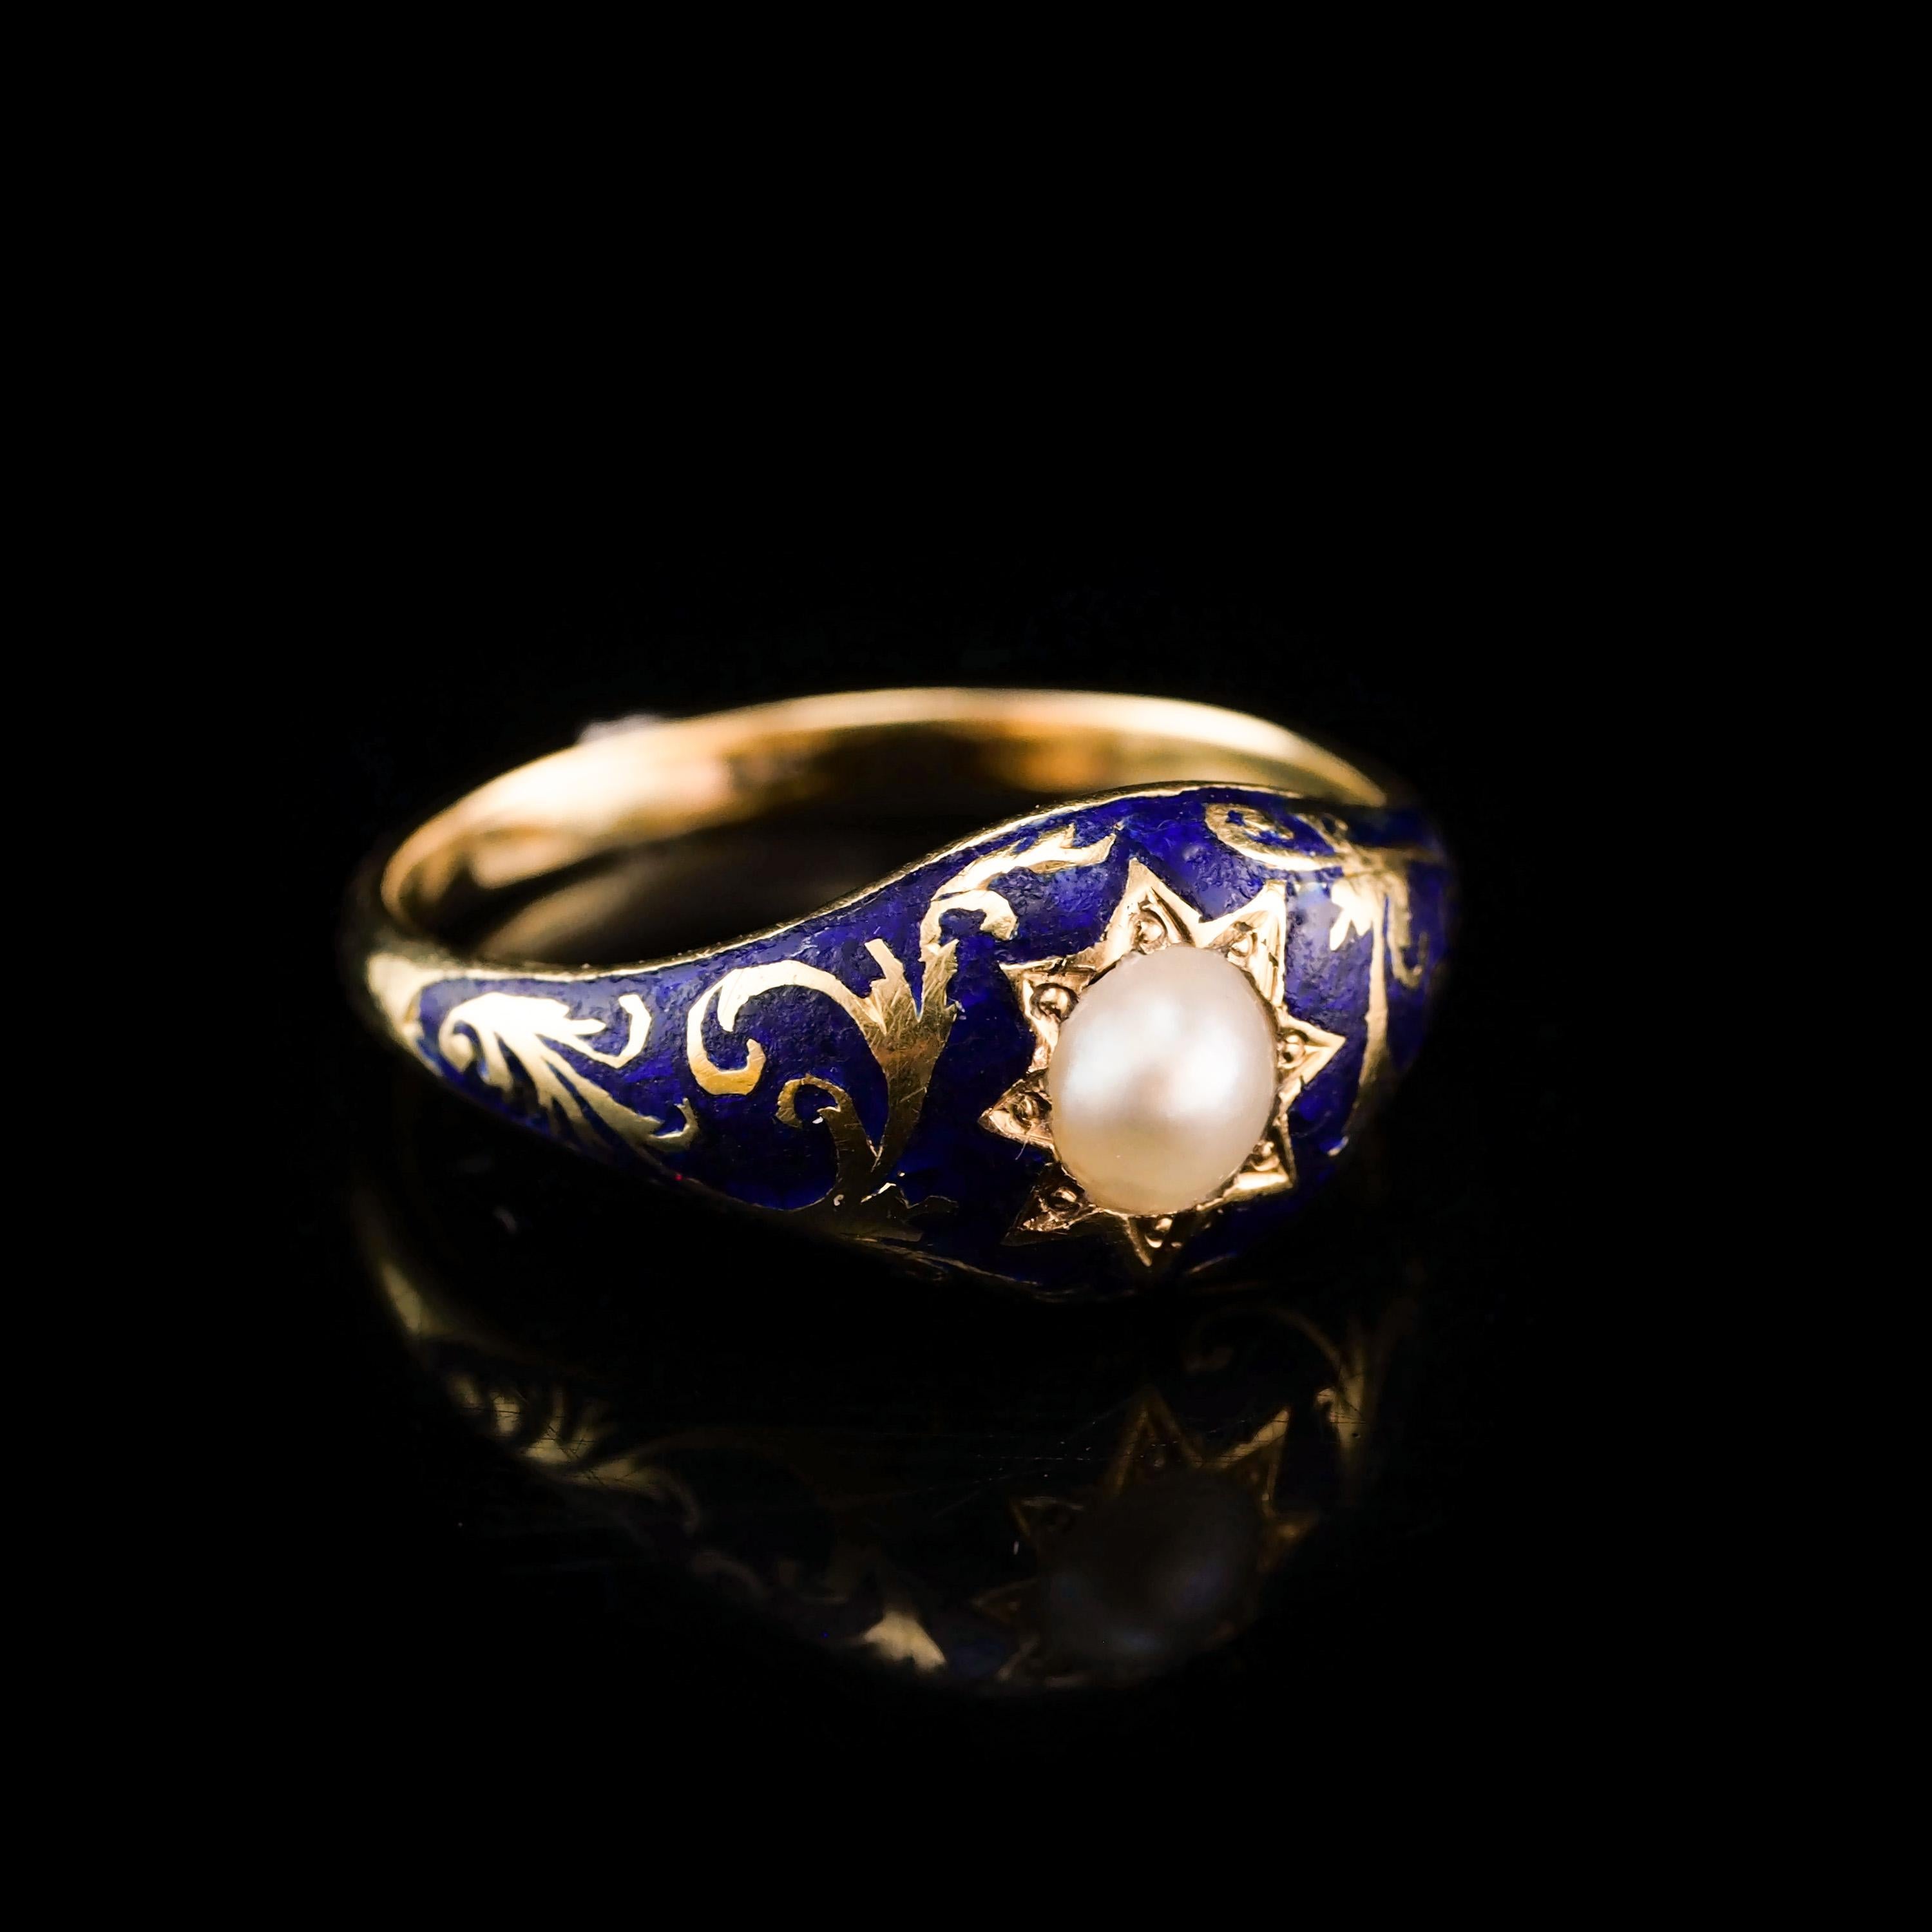 Antique Victorian 18K Gold Enamel & Pearl Ring with Scrolled Decorations c.1880 1